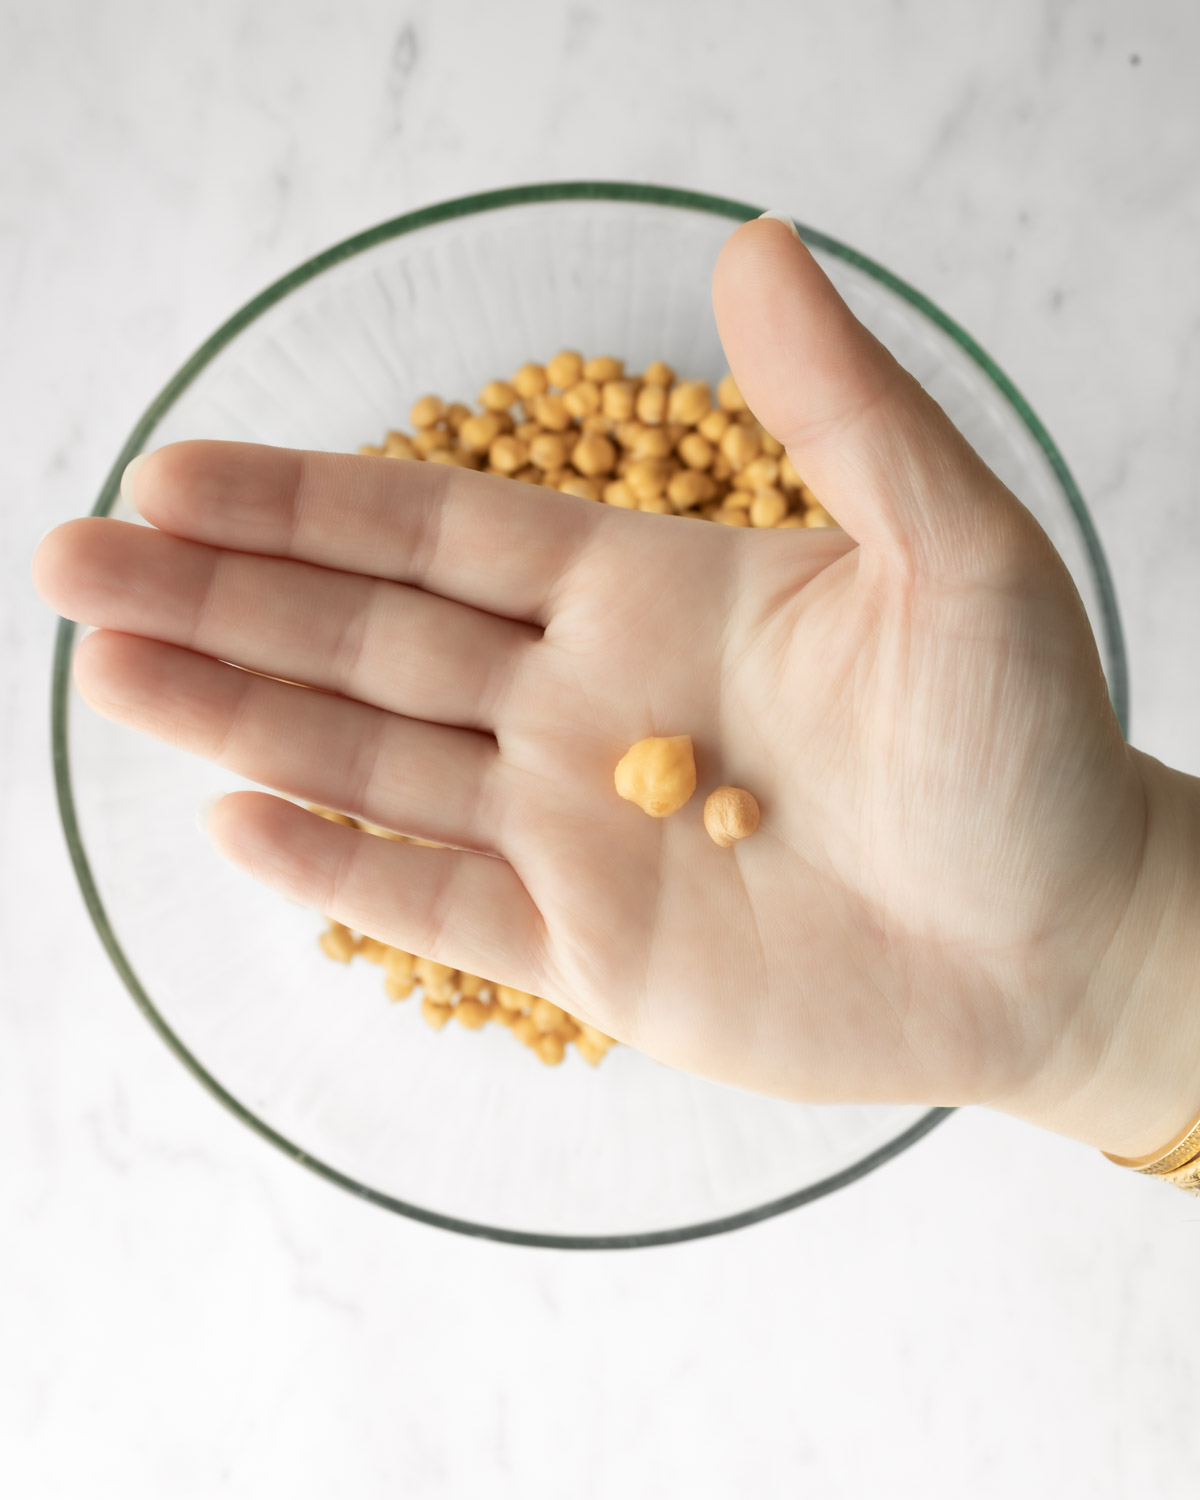 a dried chickpea and a soaked chickpea in the palm of a hand for size comparison.